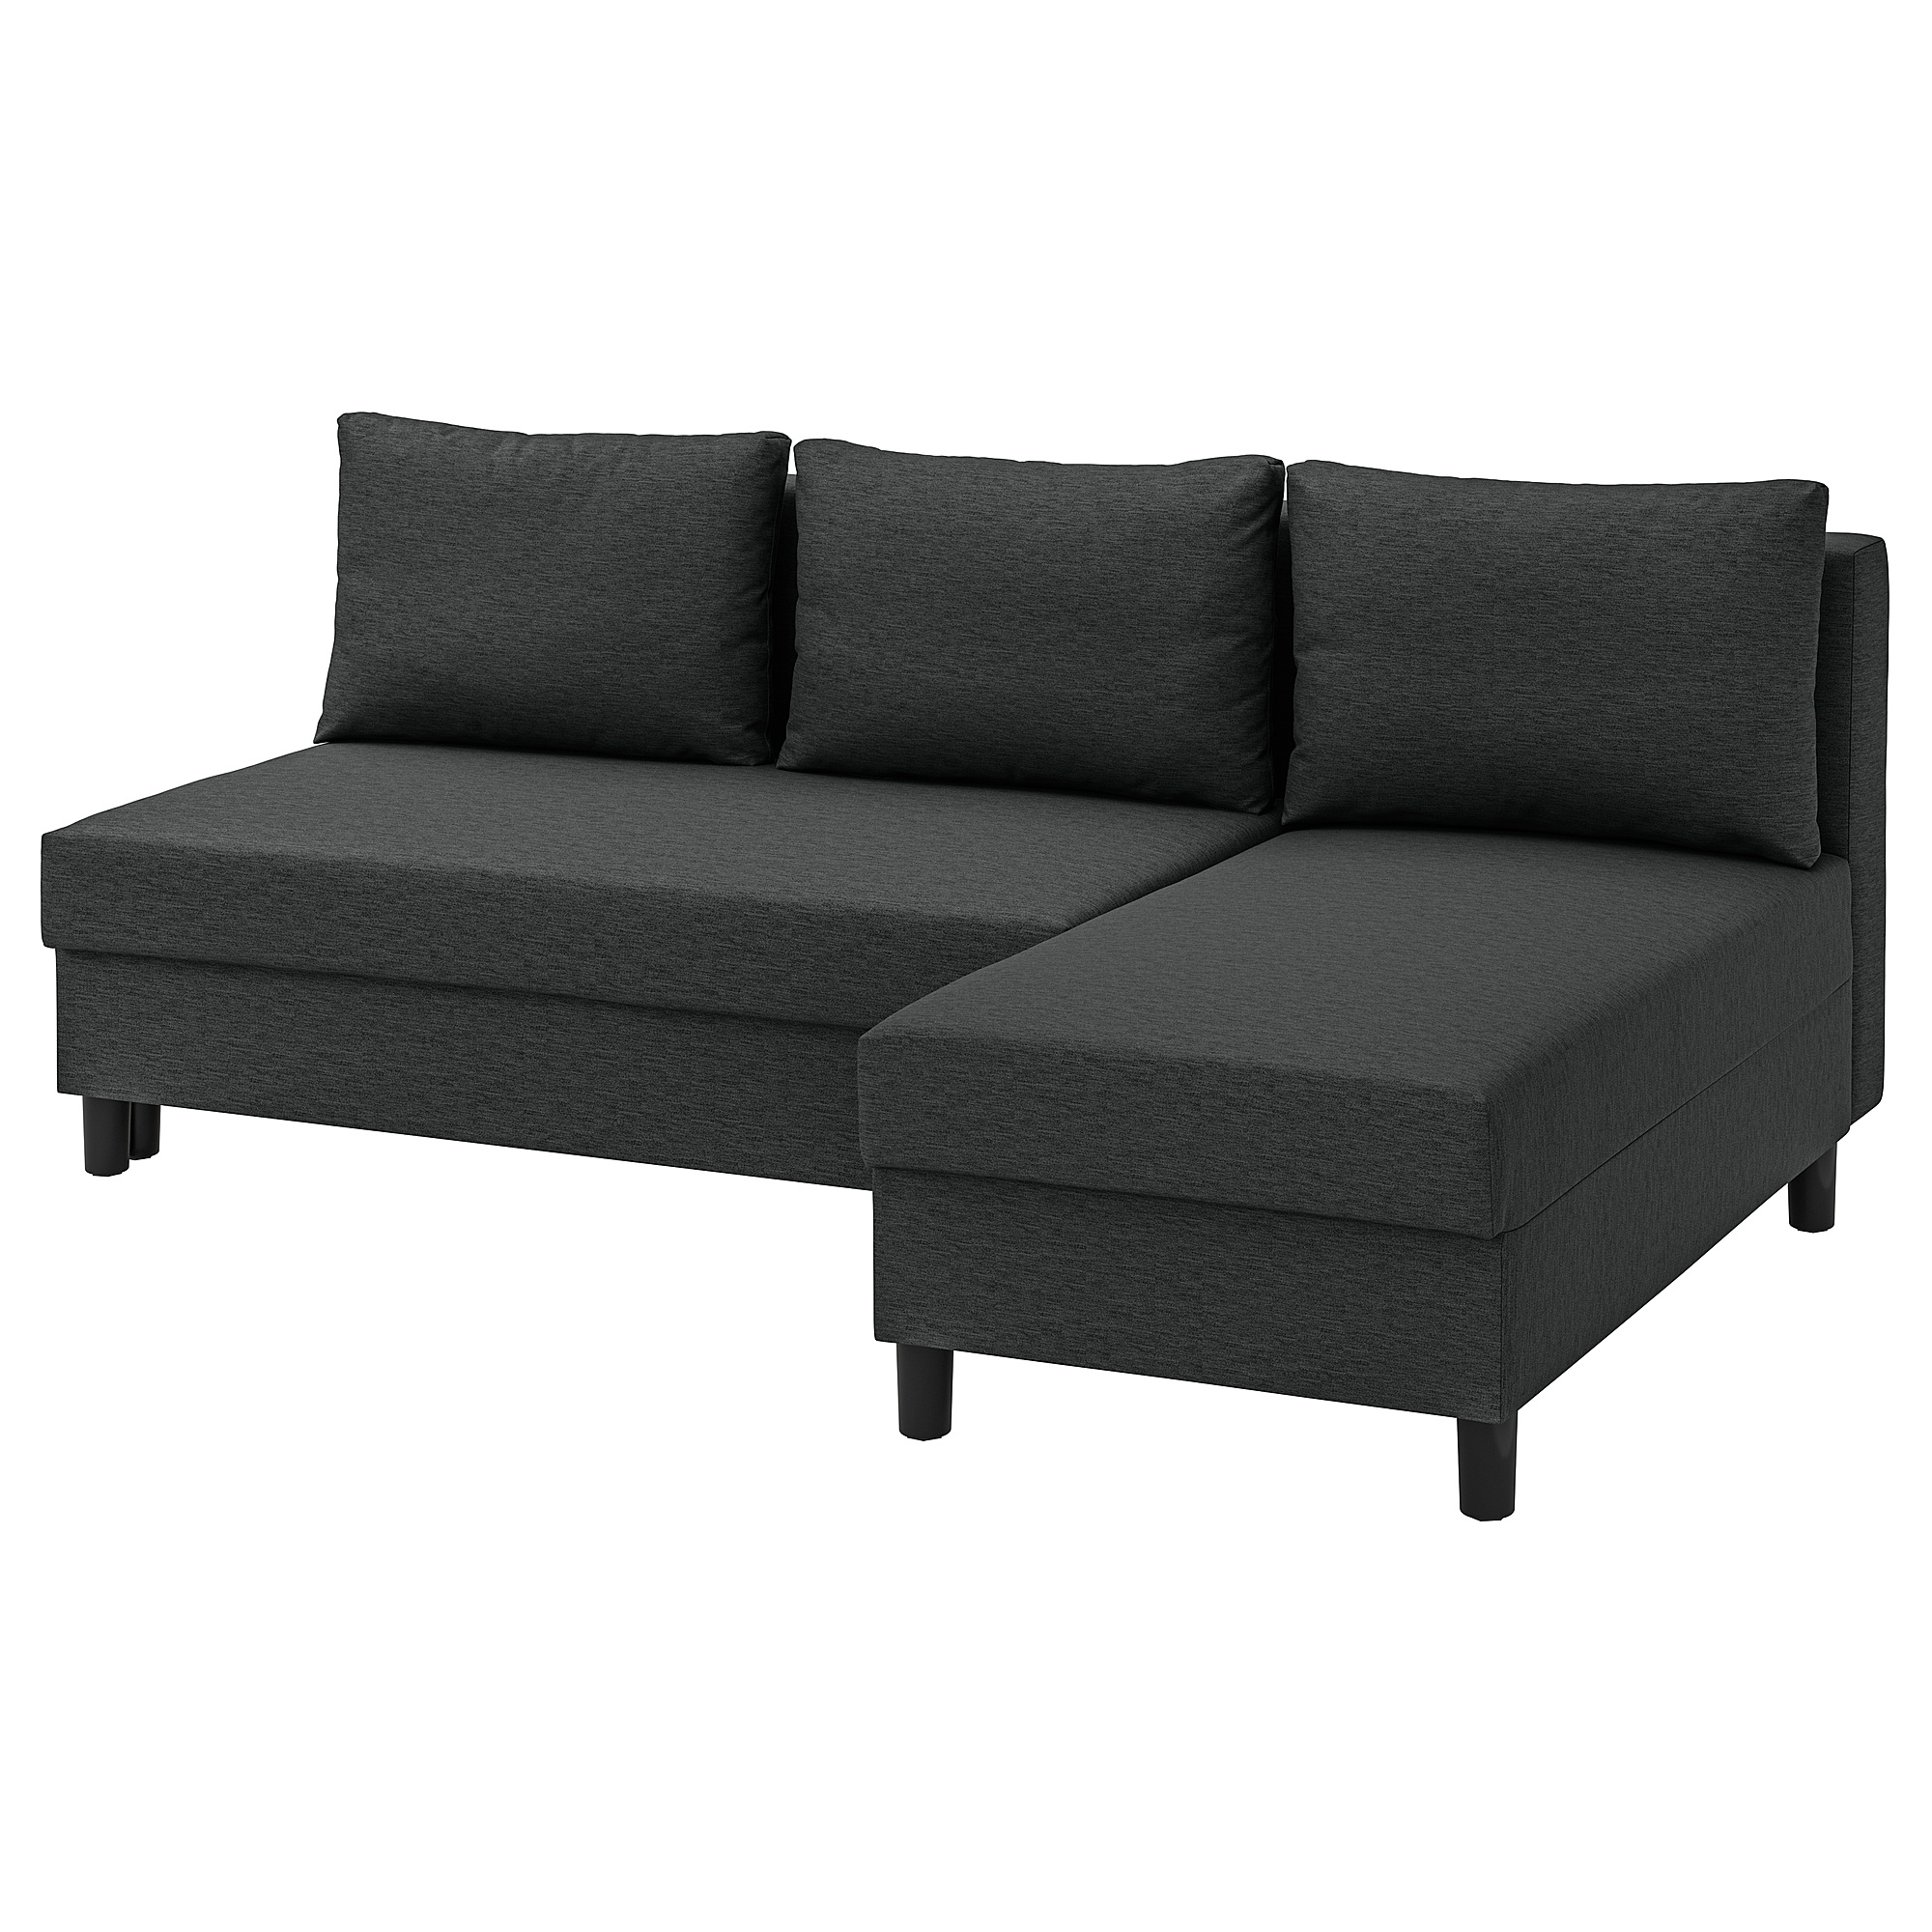 ÄLVDALEN 3-seat sofa-bed with chaise longue